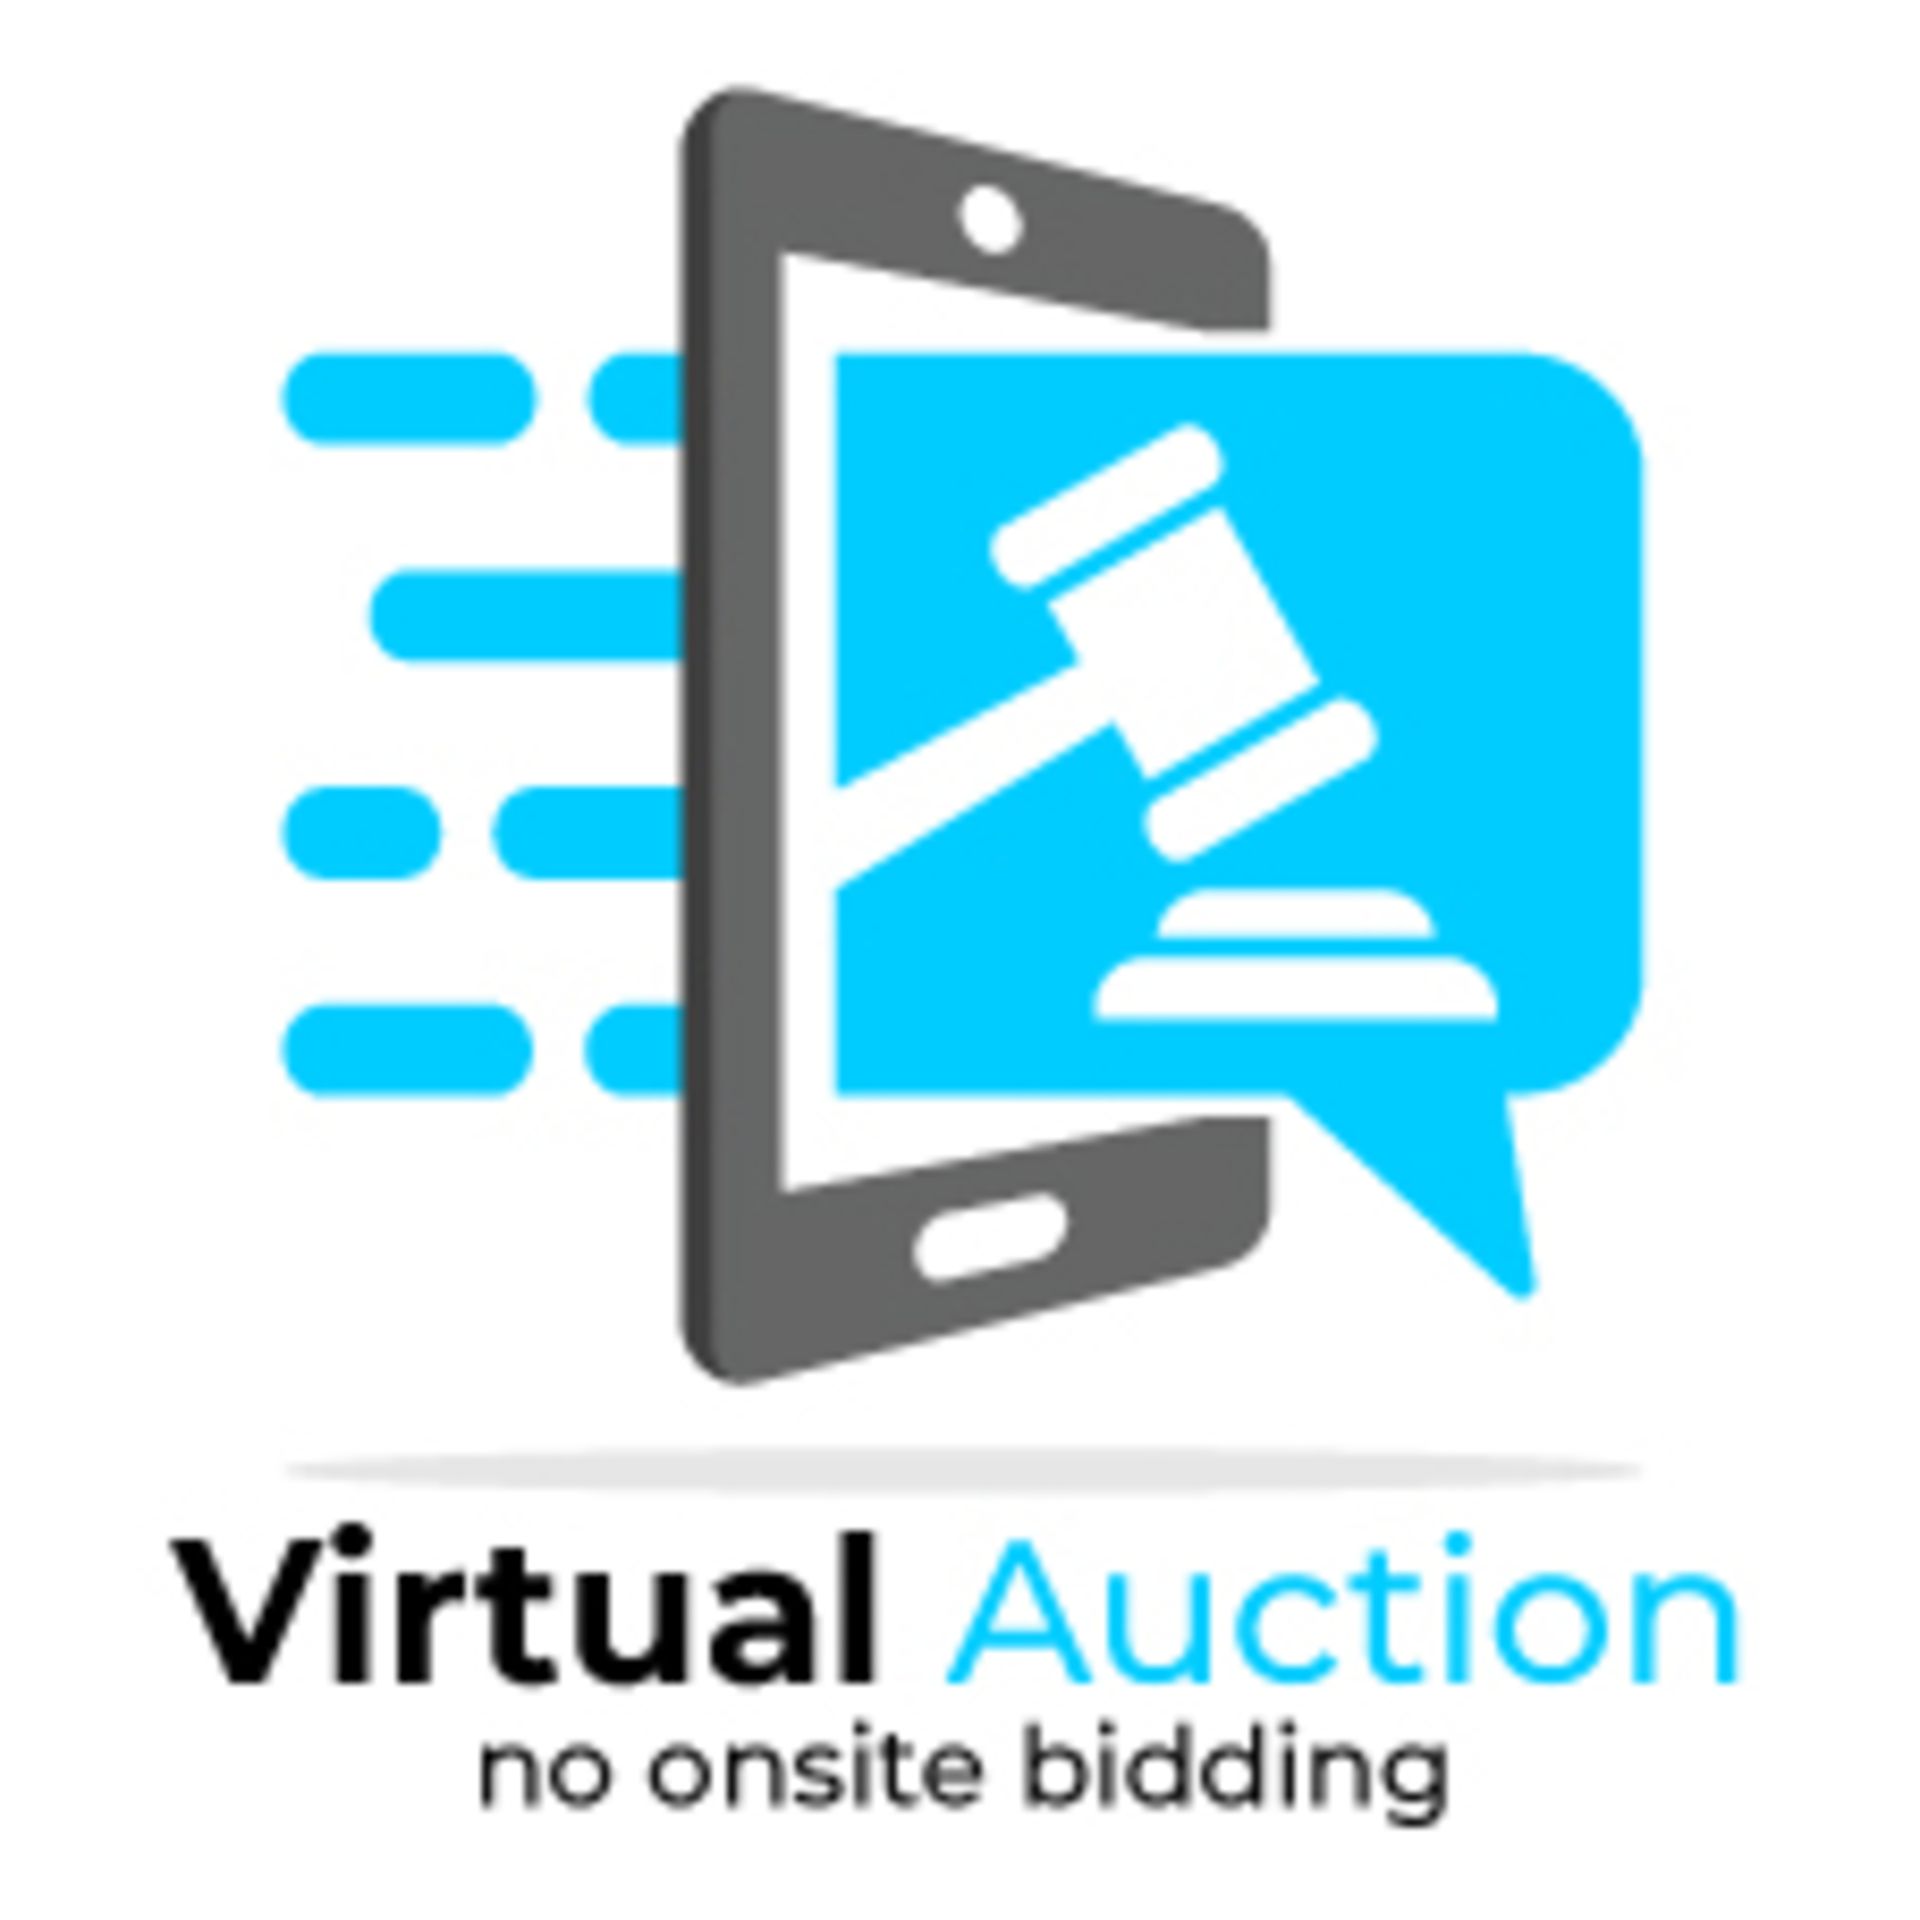 Reminder: This is a Live Virtual Event. There will be no onsite bidding. All bidding will be online.